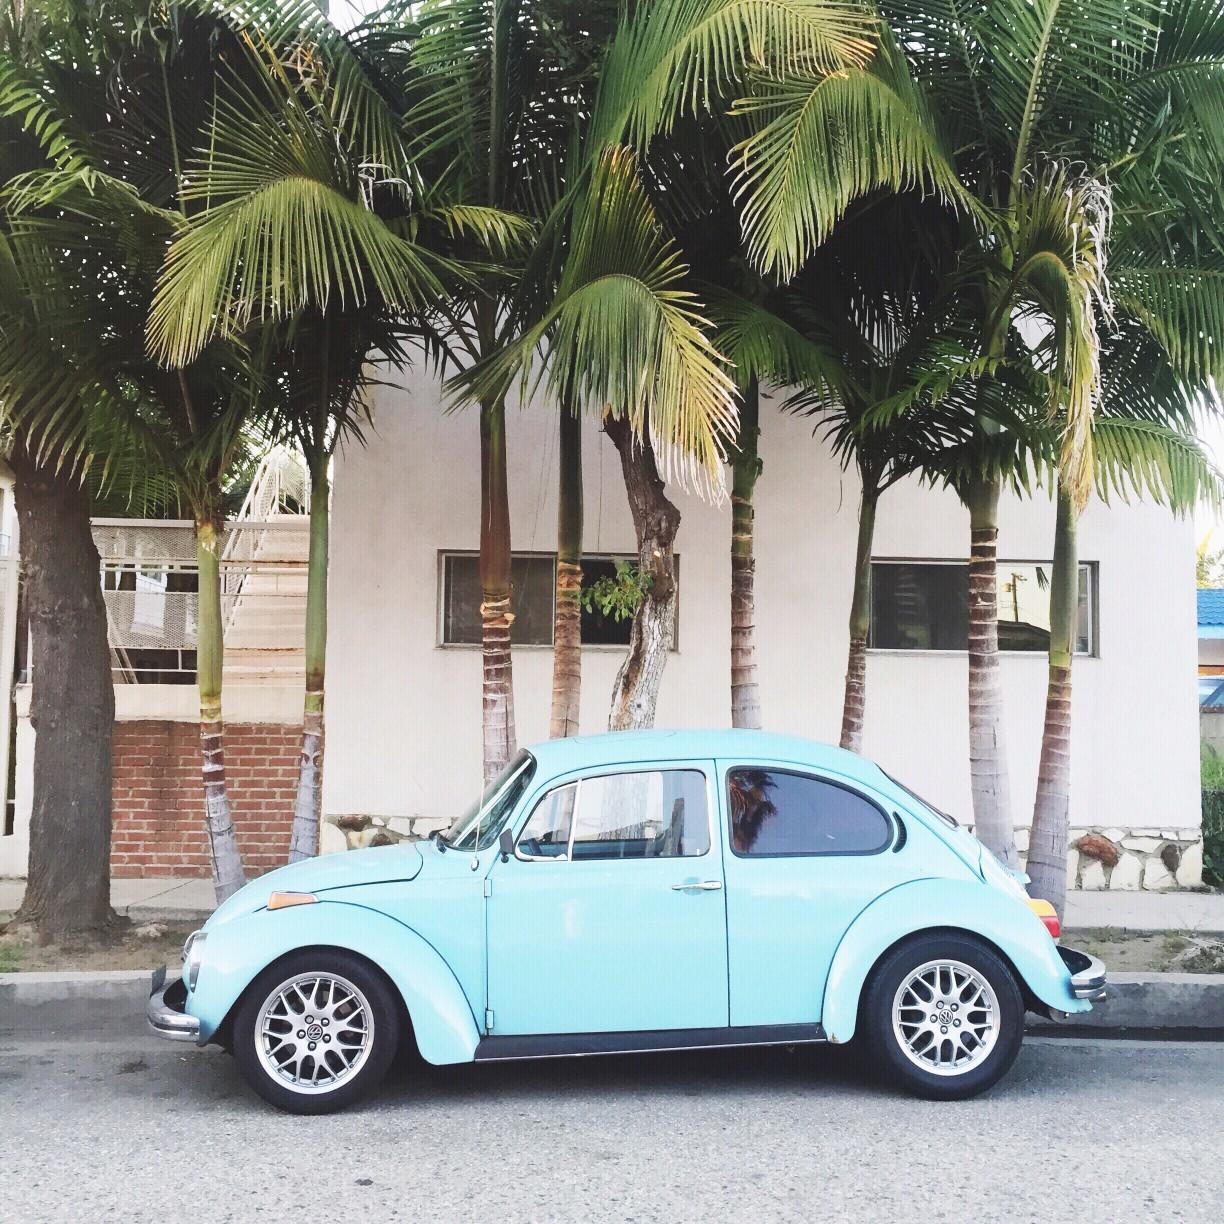 Even though the VW Beetle was discontinued by the manufacturer, it rides on in our hearts.